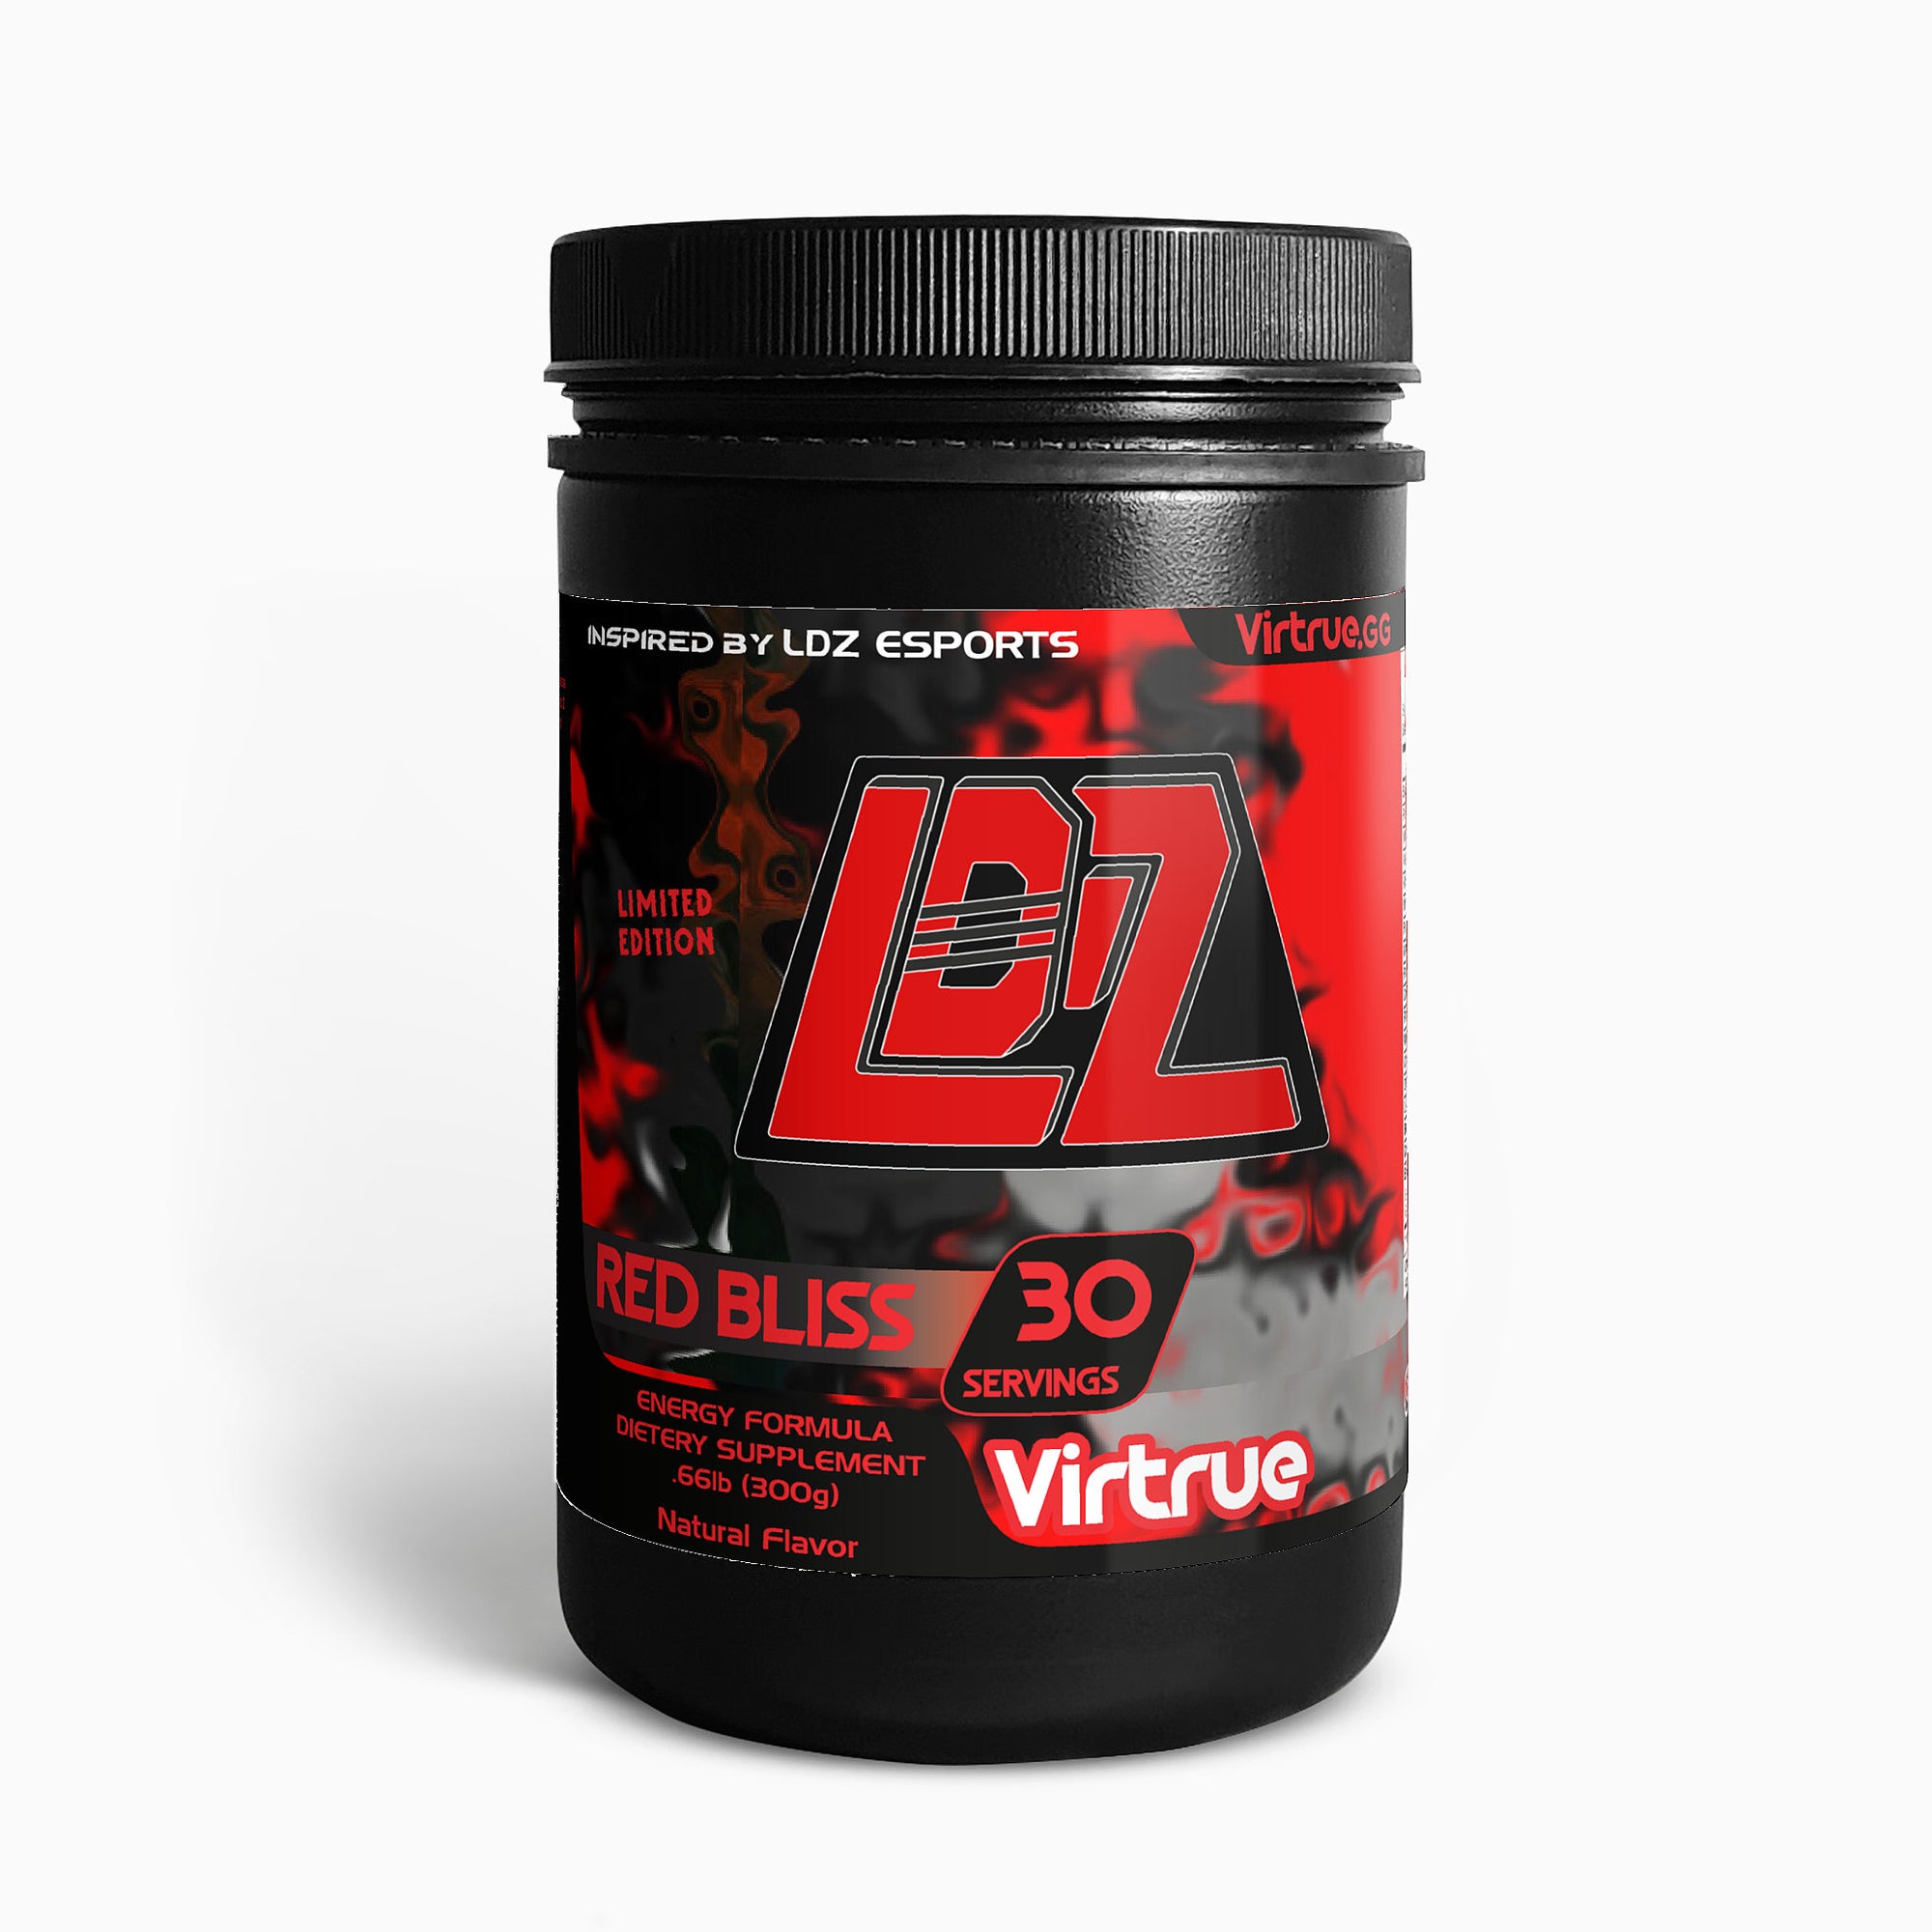 Red Bliss Energy Formula - Inspired by LDZ Esports